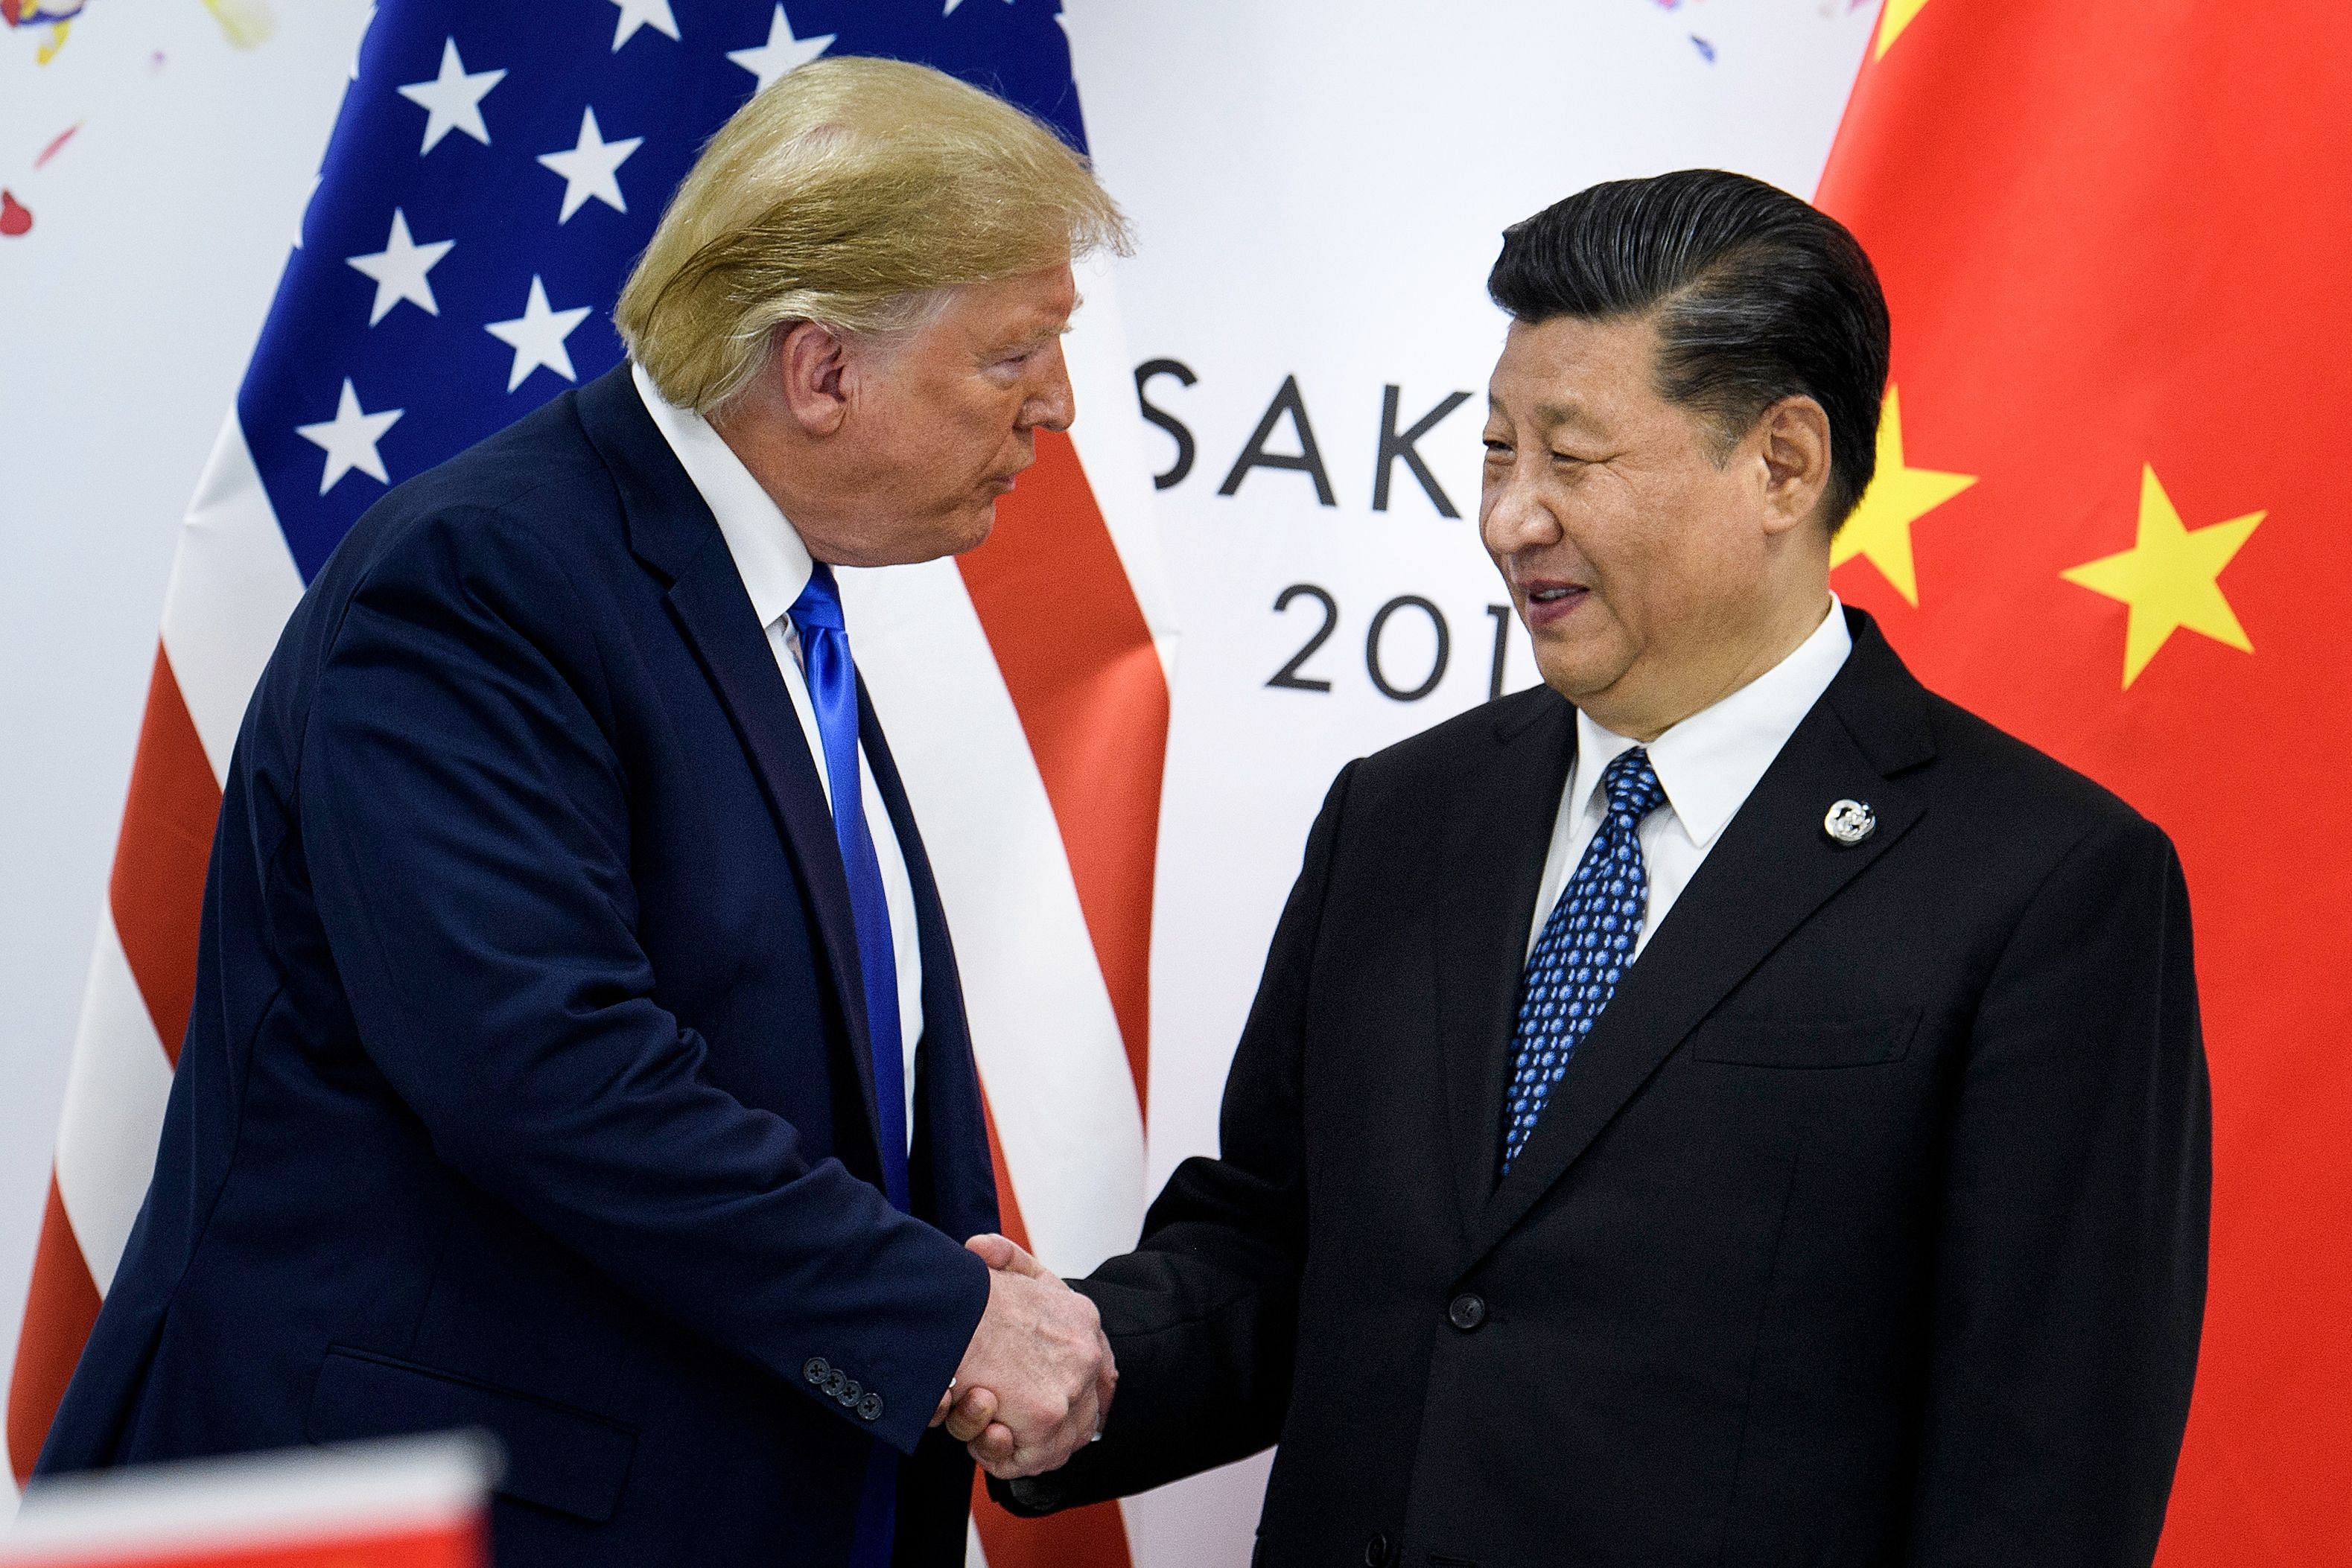 China's President Xi Jinping (R) shakes hands with US President Donald Trump before a bilateral meeting on the sidelines of the G20 Summit in Osaka. - Donald Trump pleaded with China's leader Xi Jinping for help to win re-election in 2020, the US president's former aide John Bolton writes in an explosive new book, according to excerpts published June 17. (Photo by AFP)